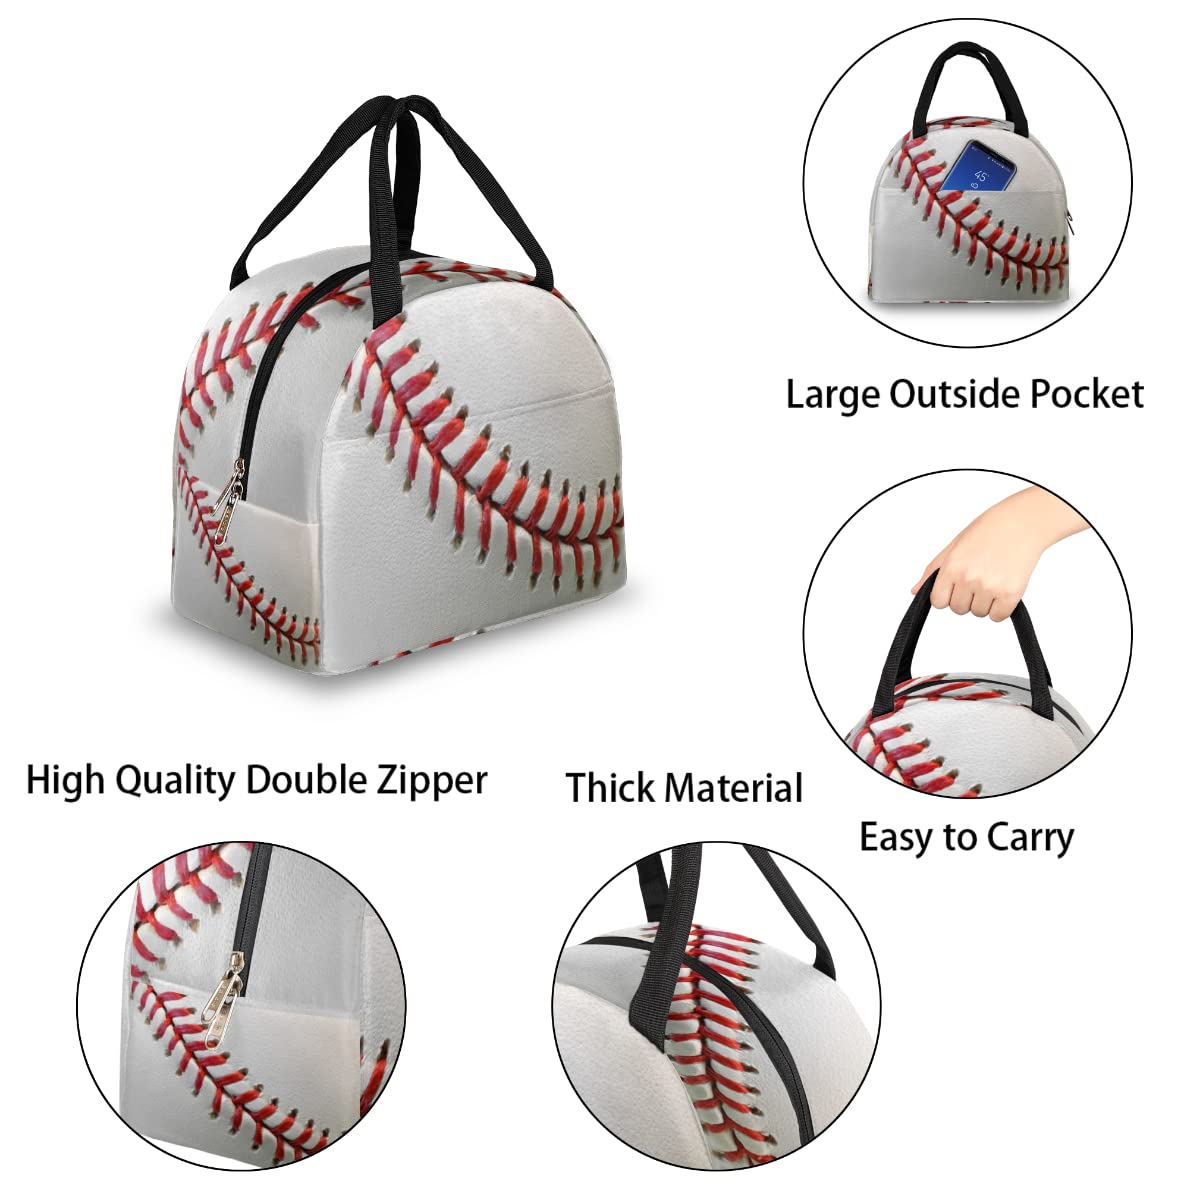 Insulated Lunch Bag for Women Men, 3D Baseball Stitch Tote Lunch Box for Adult Portable Reusable Cooler Meal Prep Organizer for Work Picnic Office Travel Beach